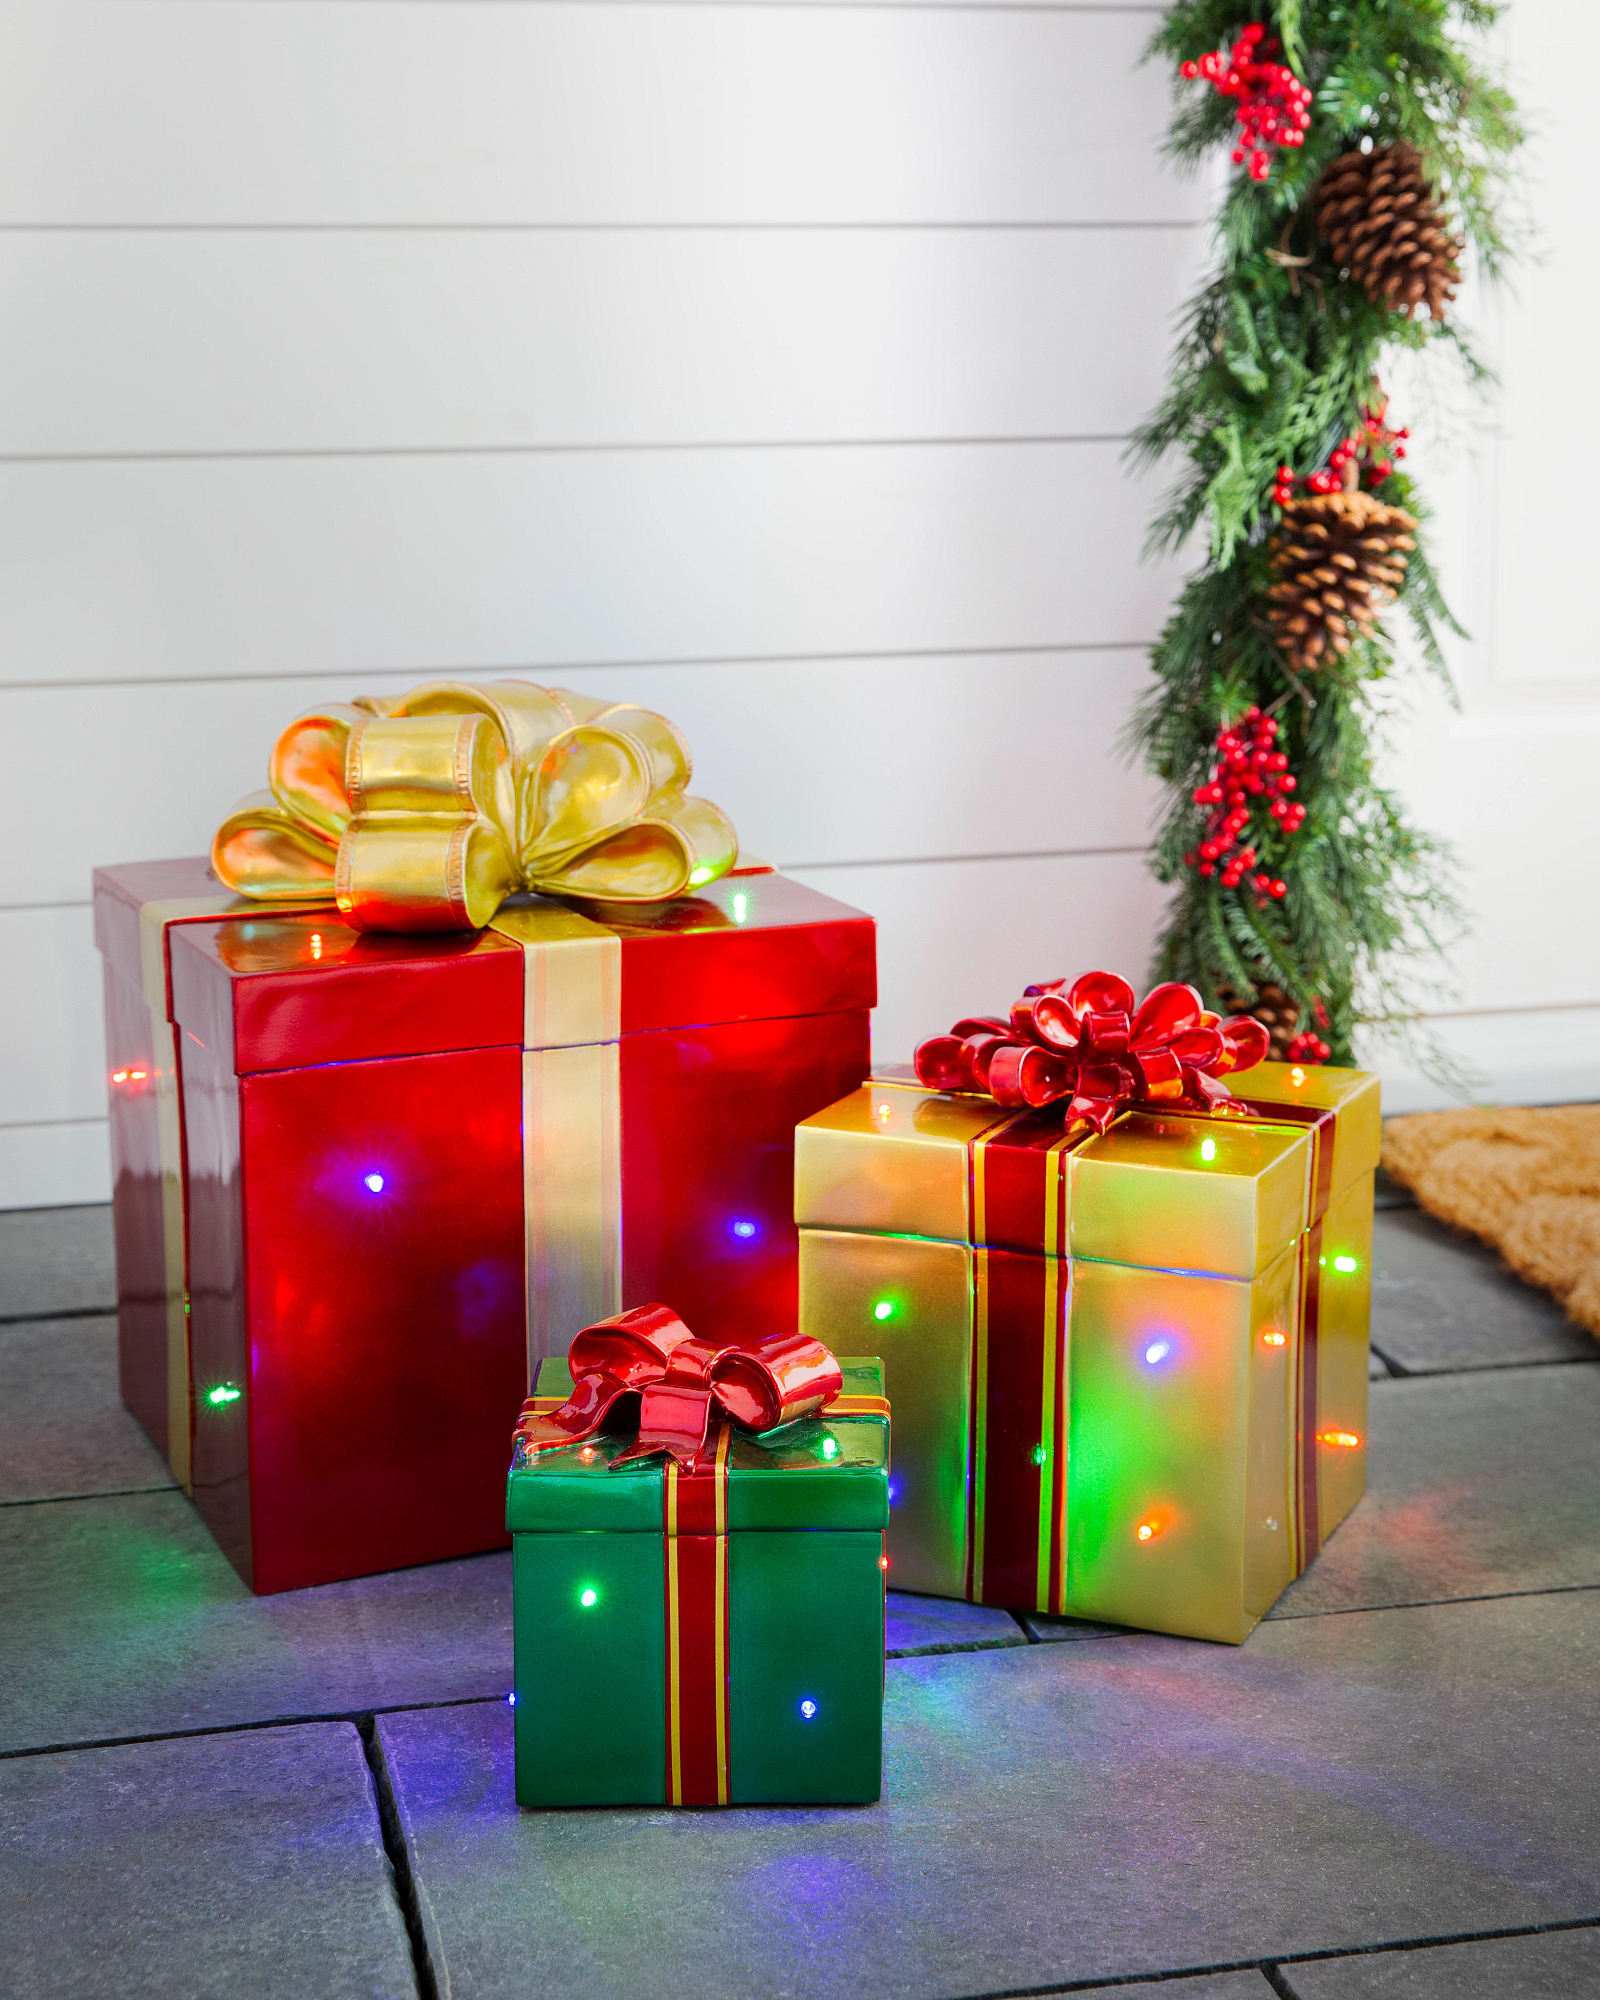 https://source.widen.net/content/l80dgoyvrb/jpeg/OUT-2041000_Outdoor-Stackable-Lighted-Christmas-Gifts_Closeup-10.jpeg?w=1600&h=2000&keep=c&crop=yes&color=cccccc&quality=100&u=7mzq6p